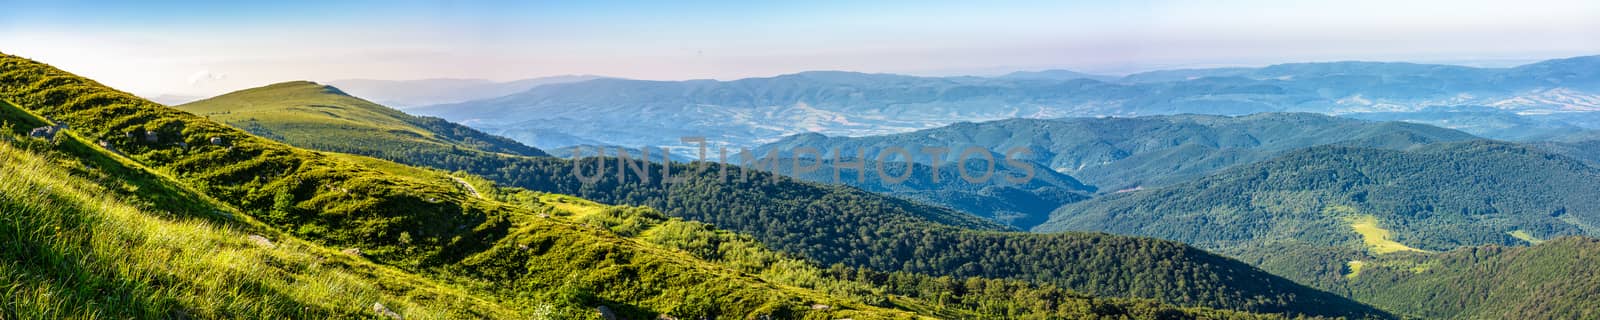 panoramic summer landscape with hillside meadow in Carpathian mountains